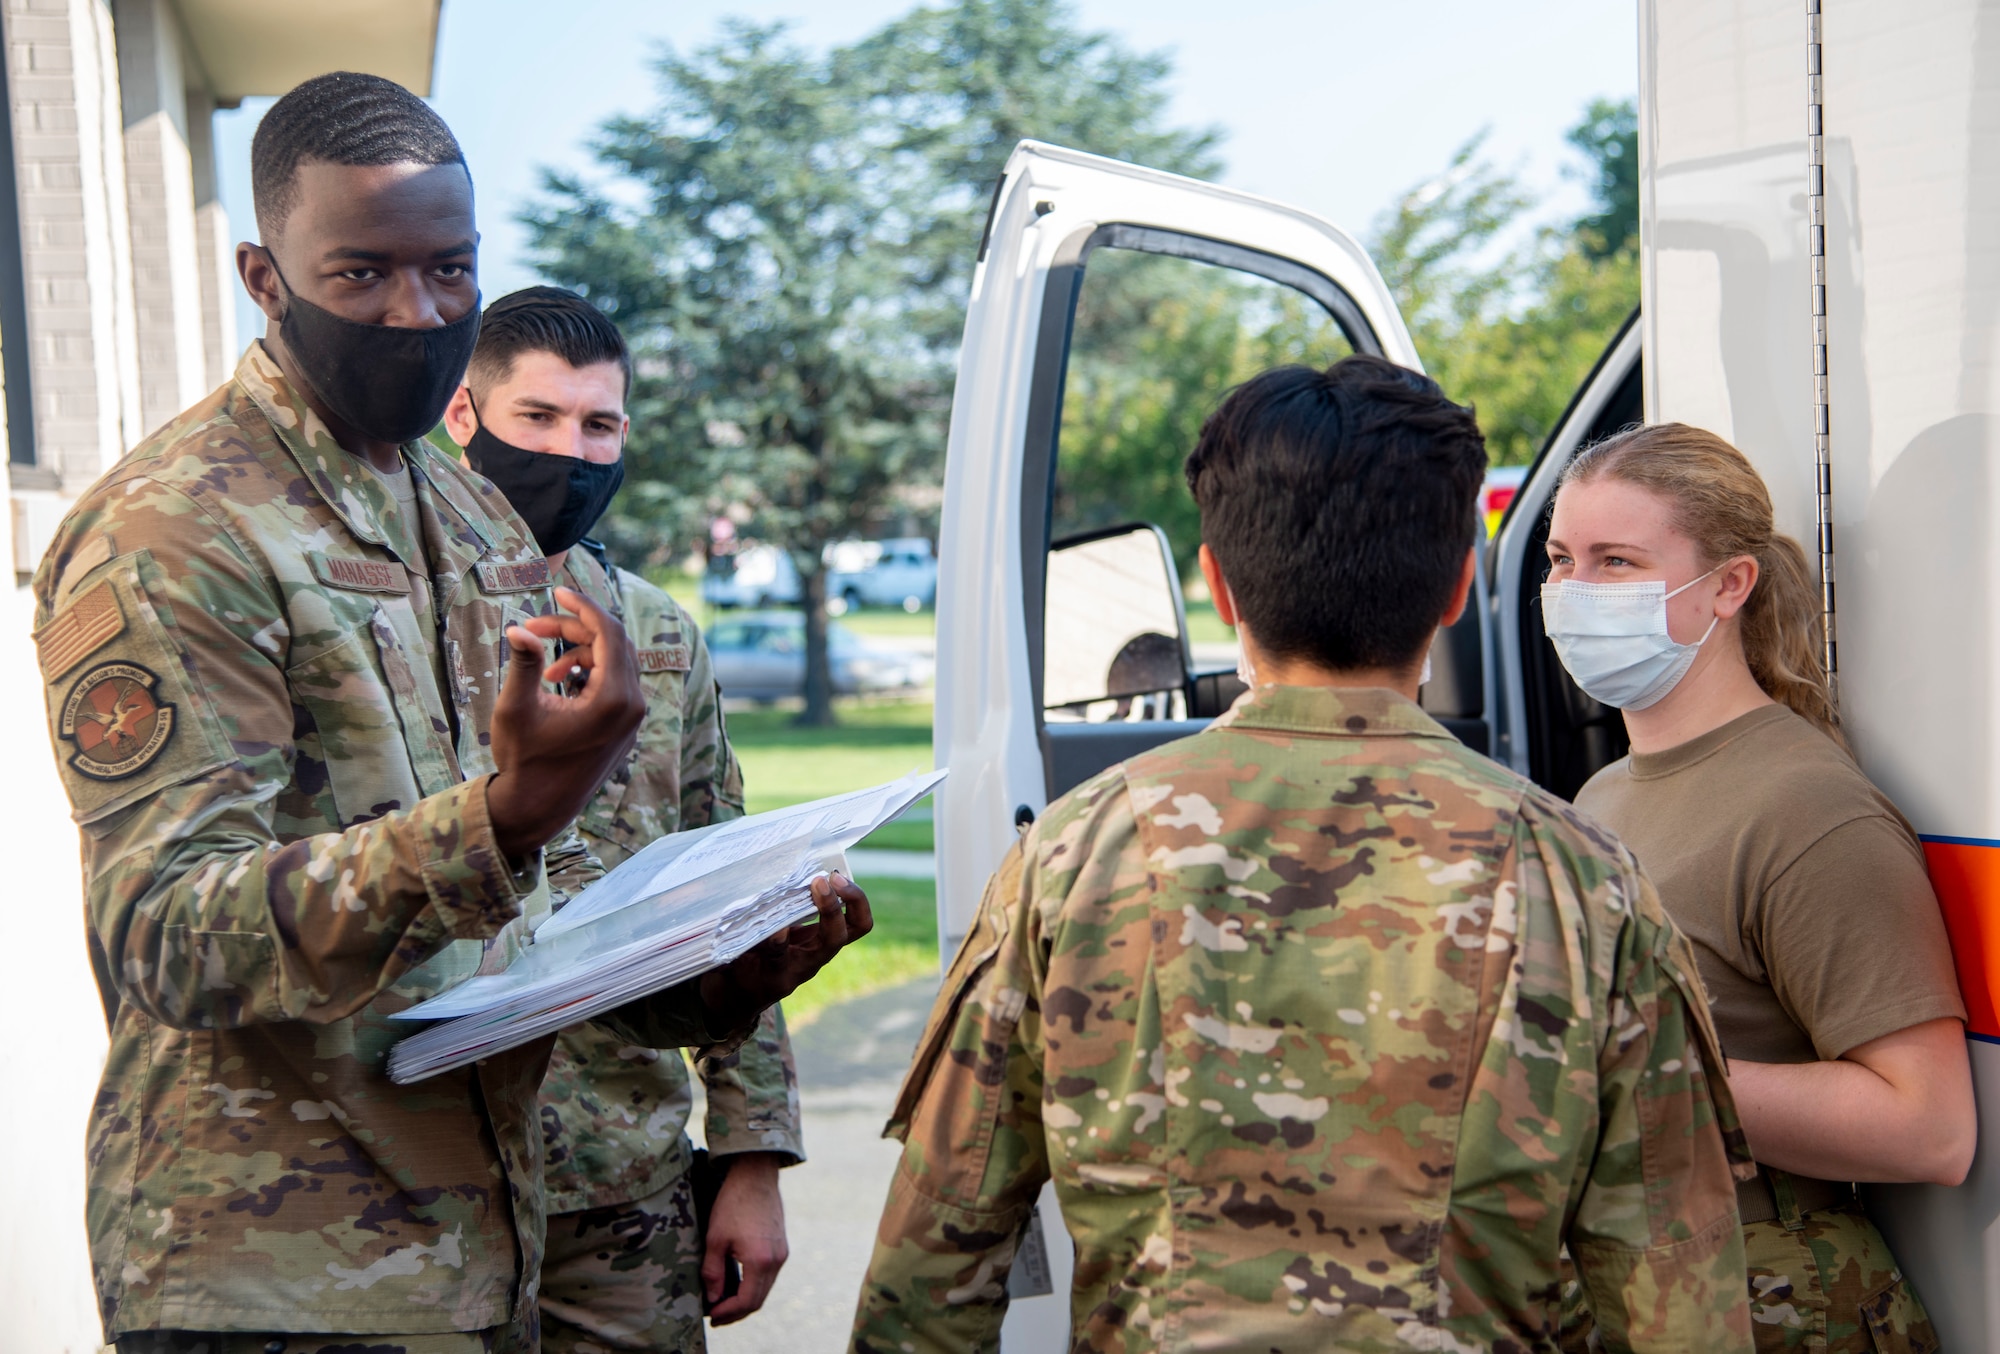 Senior Airman Floydler Manasse, left, 436th Health Care Operations Squadron emergency medical technician, discusses protocols for ambulance operation during ambulance response team augmentee training at Dover Air Force Base, Delaware, Aug. 11, 2021. The 436th Medical Group is training clinical medics to become augmentees during emergency calls, allowing core medics to focus on patients, improving overall patient safety. (U.S. Air Force photo by Tech. Sgt. Nicole Leidholm)